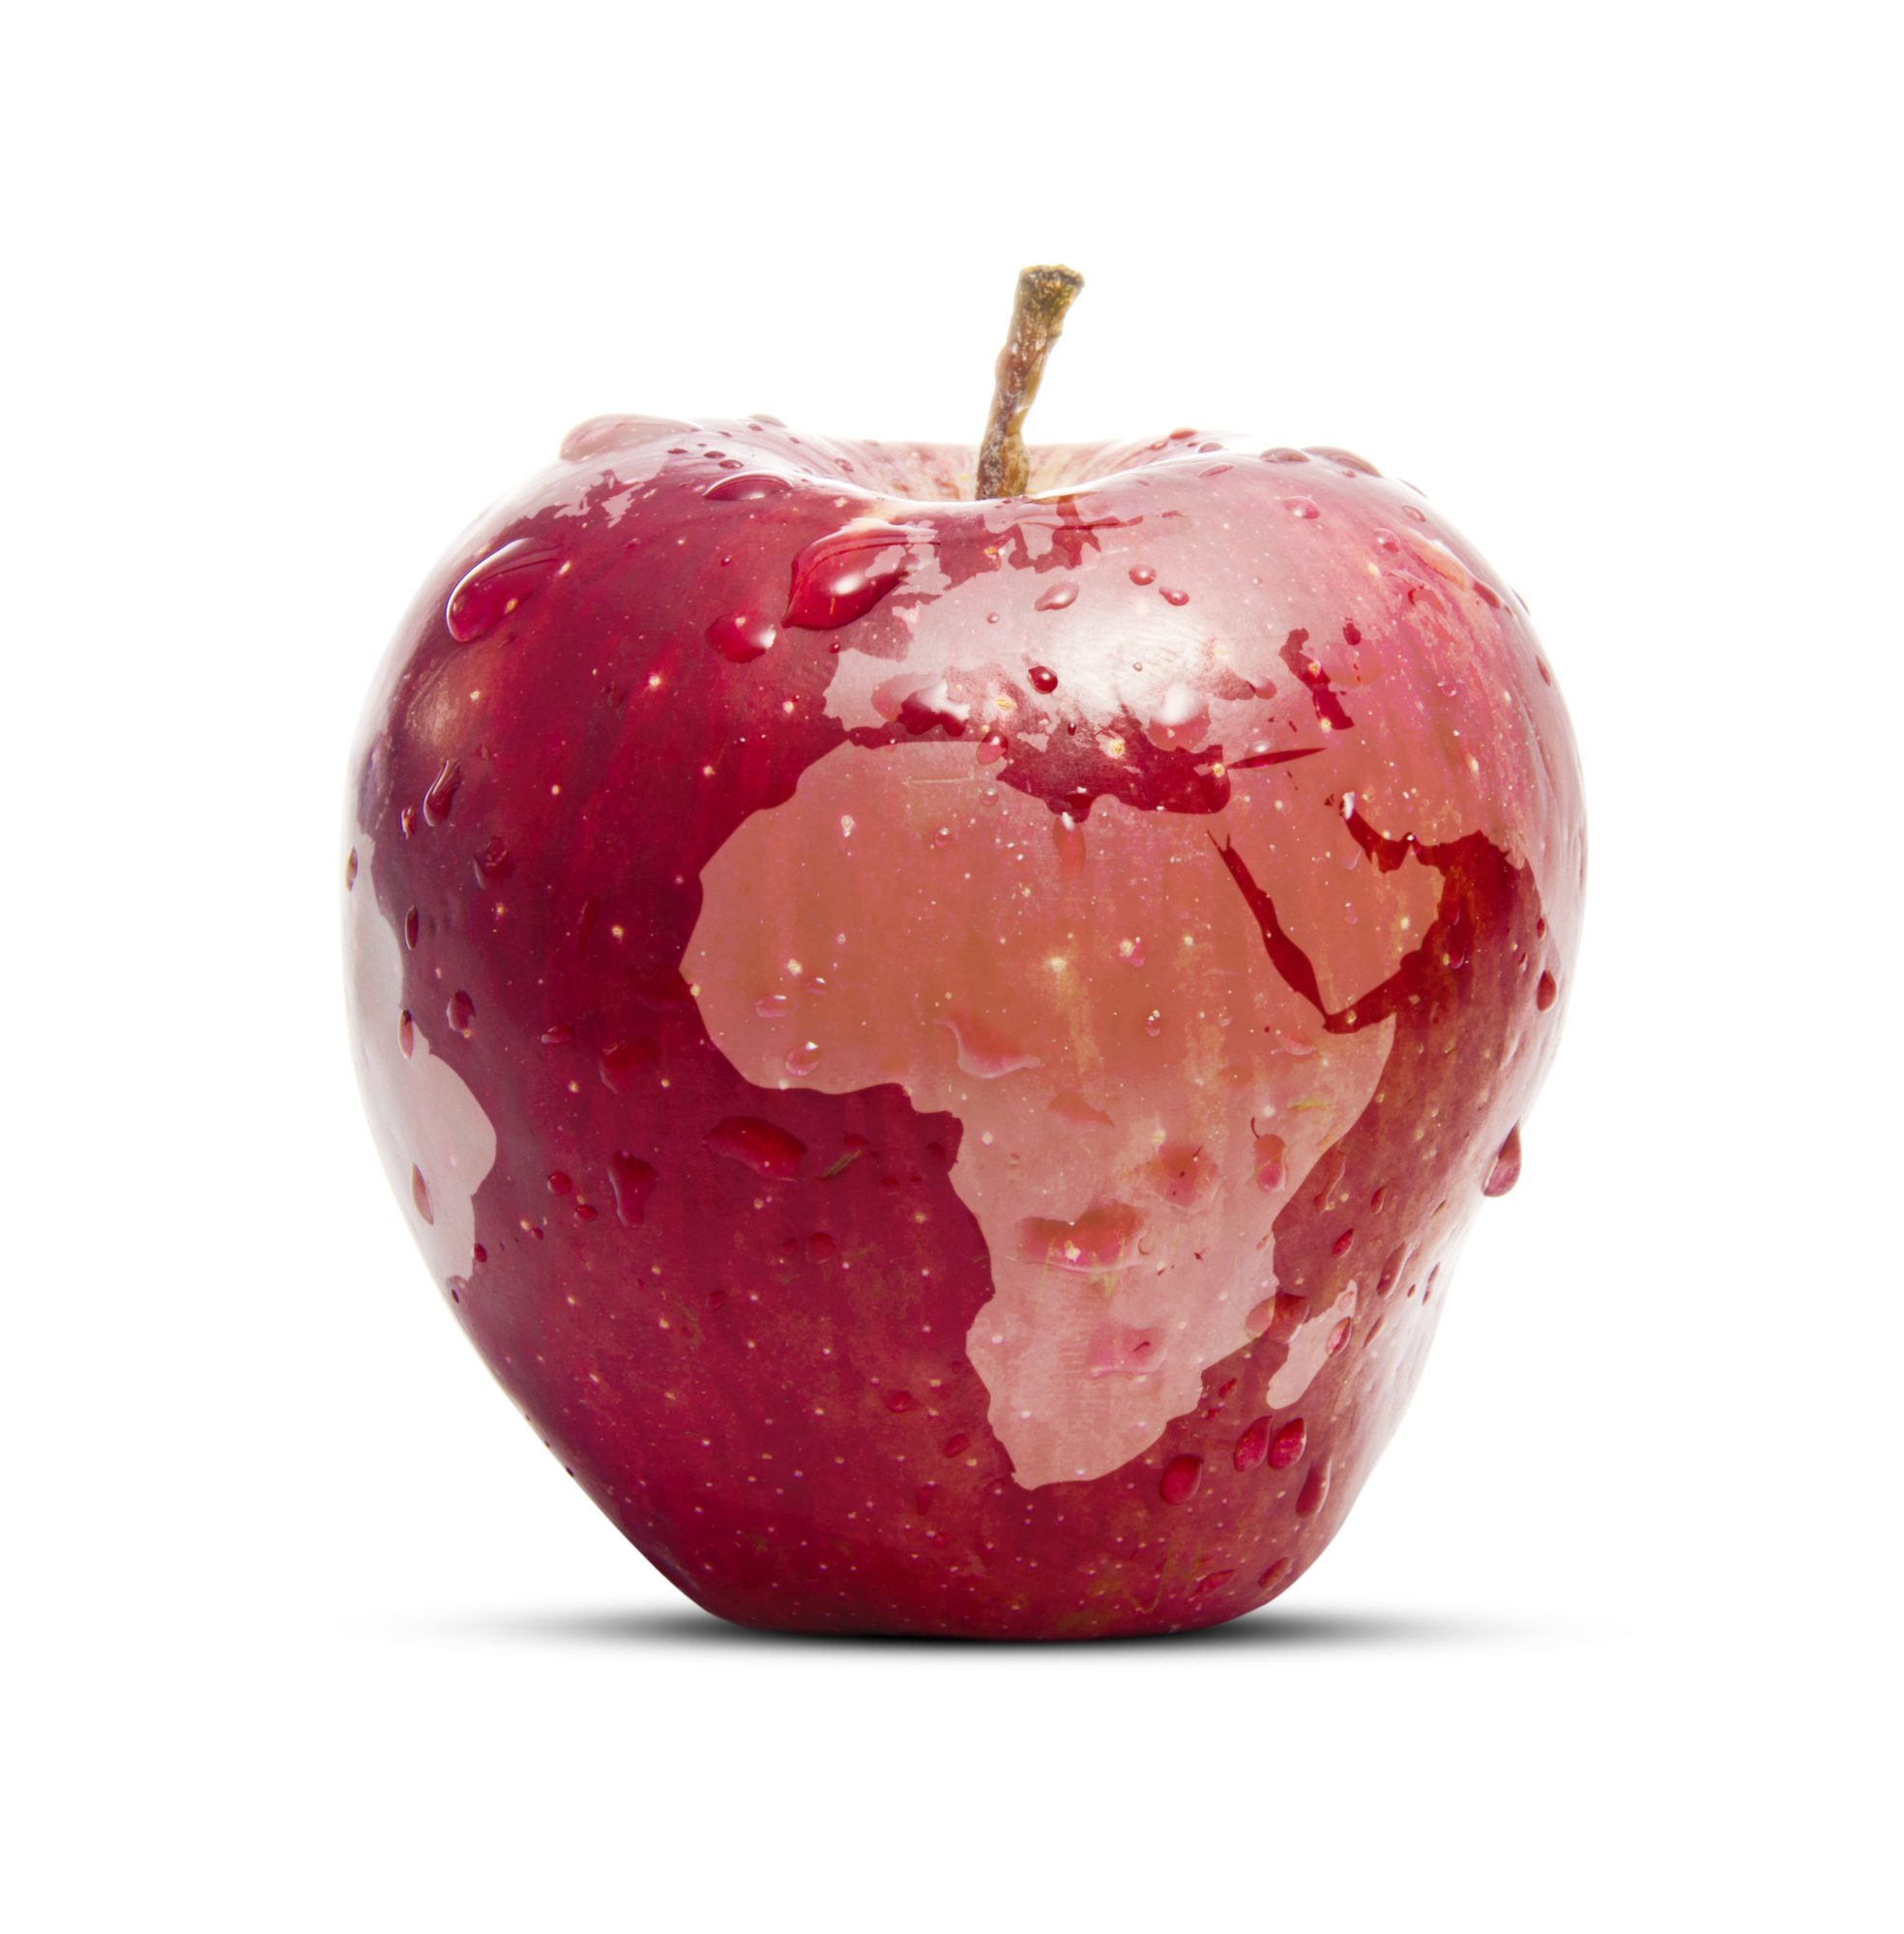 World map superimposed on an apple, representing Apple's Places on Maps.